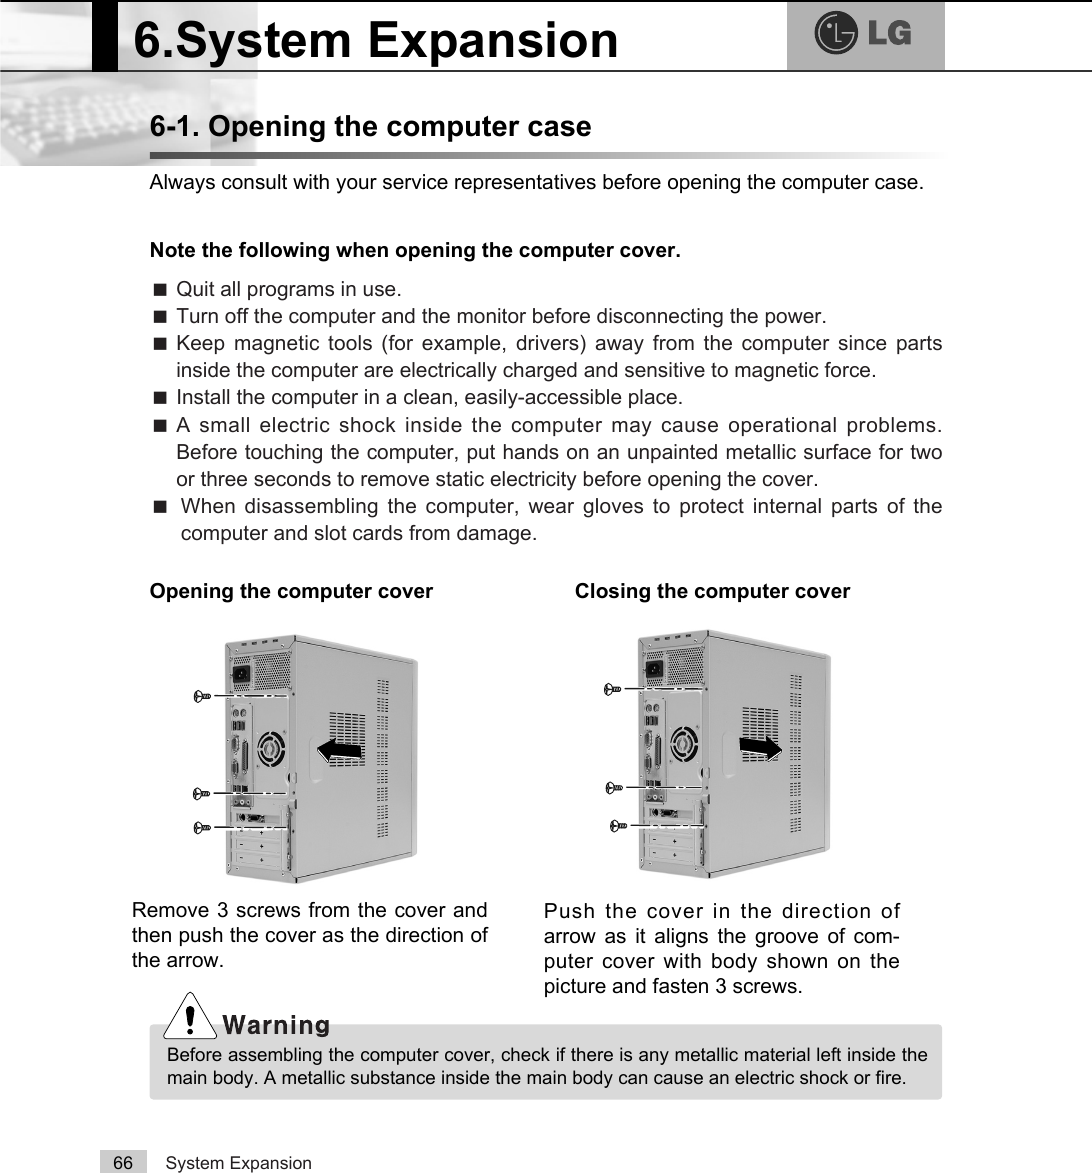 System Expansion666-1. Opening the computer caseAlways consult with your service representatives before opening the computer case.Note the following when opening the computer cover.Opening the computer cover Closing the computer coverãQuit all programs in use.ãTurn off the computer and the monitor before disconnecting the power.ãKeep magnetic tools (for example, drivers) away from the computer since partsinside the computer are electrically charged and sensitive to magnetic force.ãInstall the computer in a clean, easily-accessible place.ãA small electric shock inside the computer may cause operational problems.Before touching the computer, put hands on an unpainted metallic surface for twoor three seconds to remove static electricity before opening the cover.ãWhen disassembling the computer, wear gloves to protect internal parts of thecomputer and slot cards from damage.6.System ExpansionBefore assembling the computer cover, check if there is any metallic material left inside themain body. A metallic substance inside the main body can cause an electric shock or fire.Remove 3 screws from the cover andthen push the cover as the direction ofthe arrow.Push the cover in the direction ofarrow as it aligns the groove of com-puter cover with body shown on thepicture and fasten 3 screws.